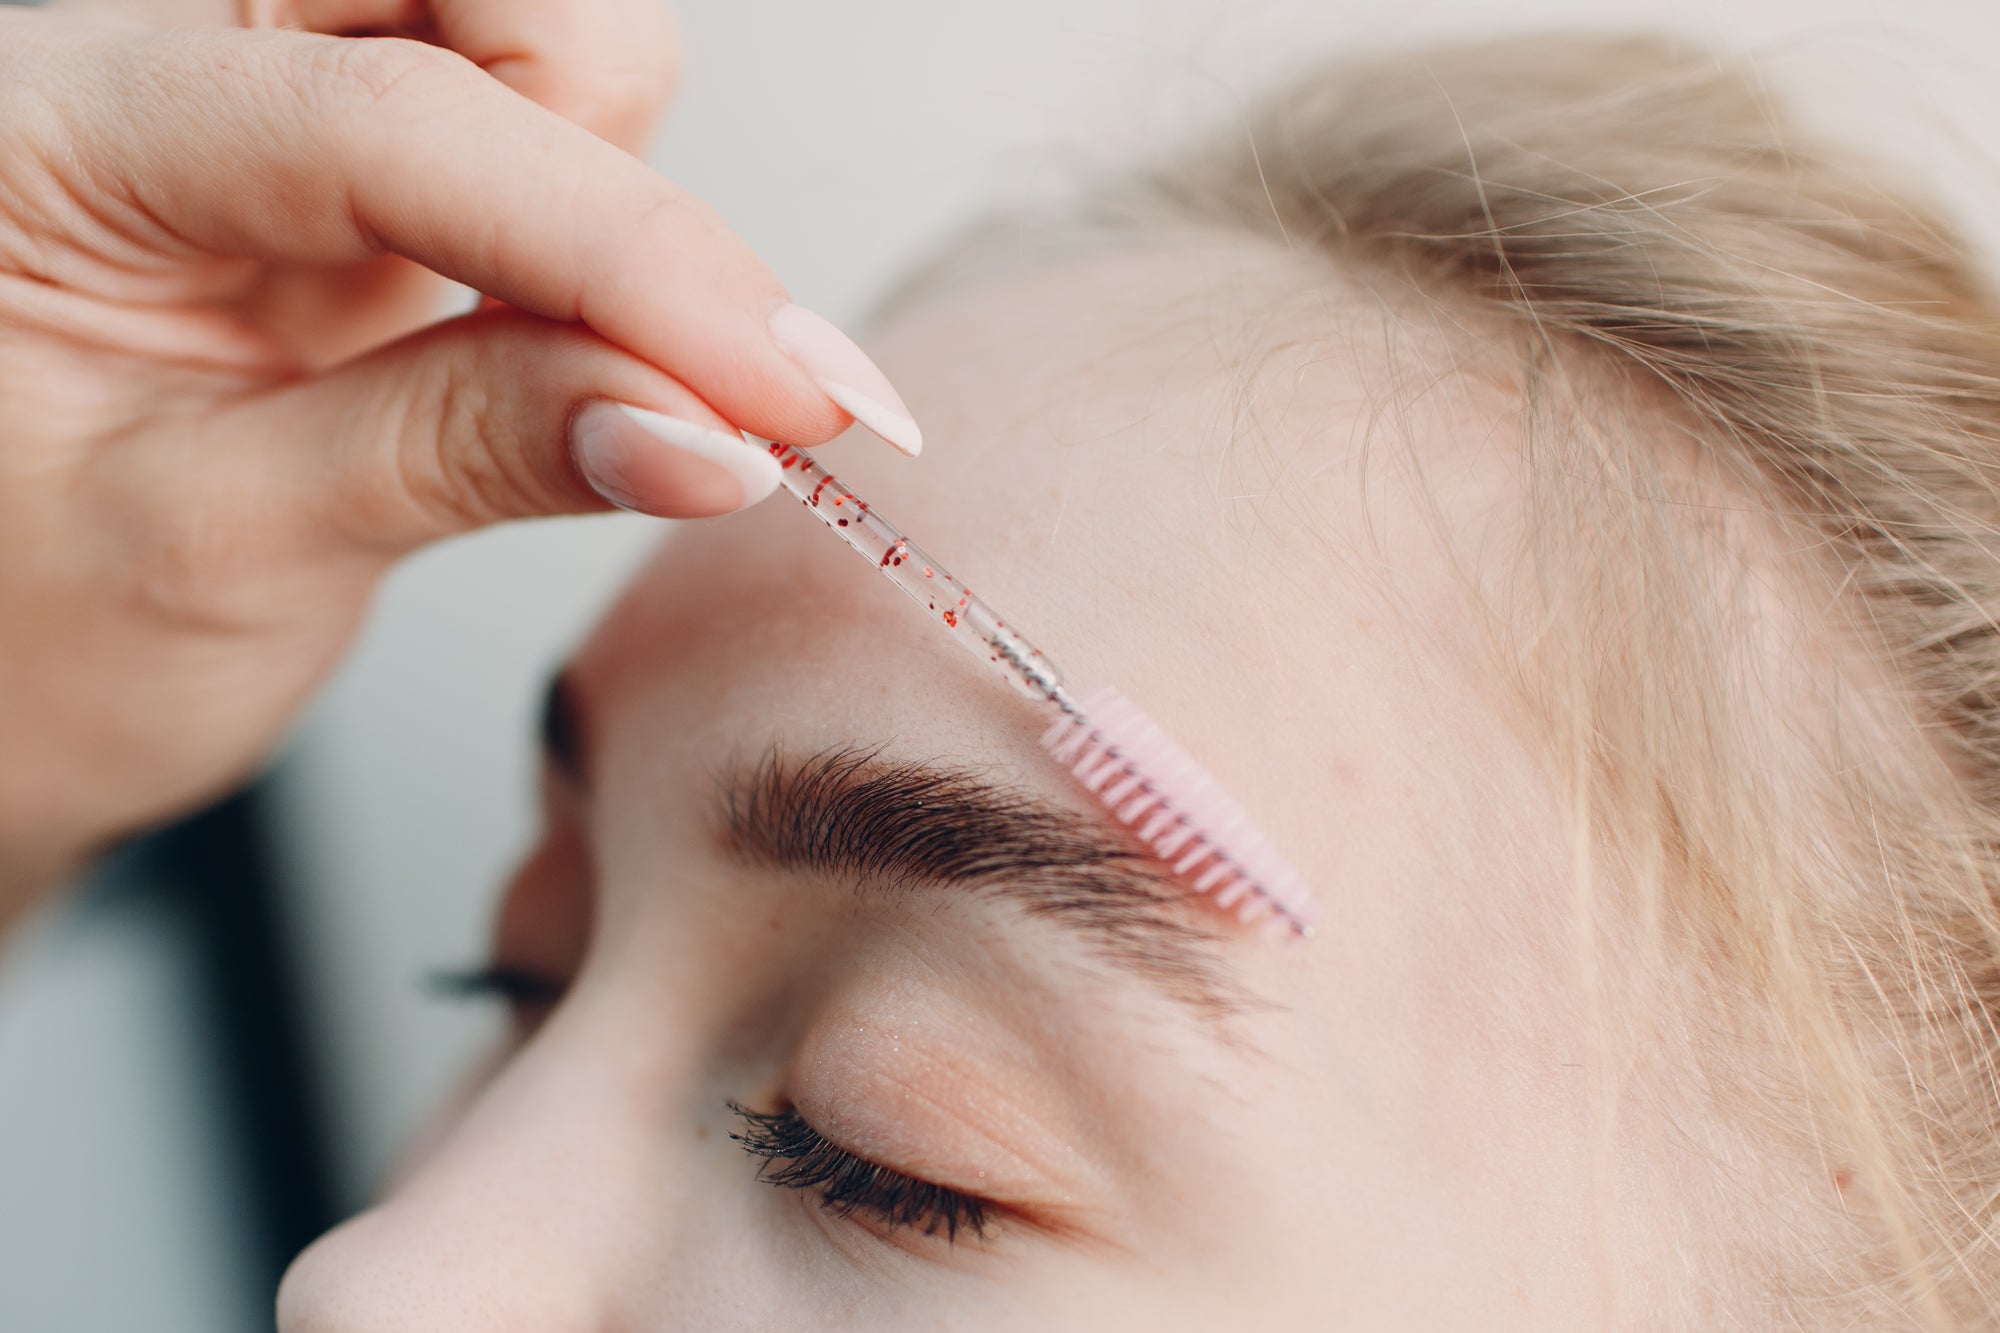 10 Things Your Eyebrows Can Reveal About You